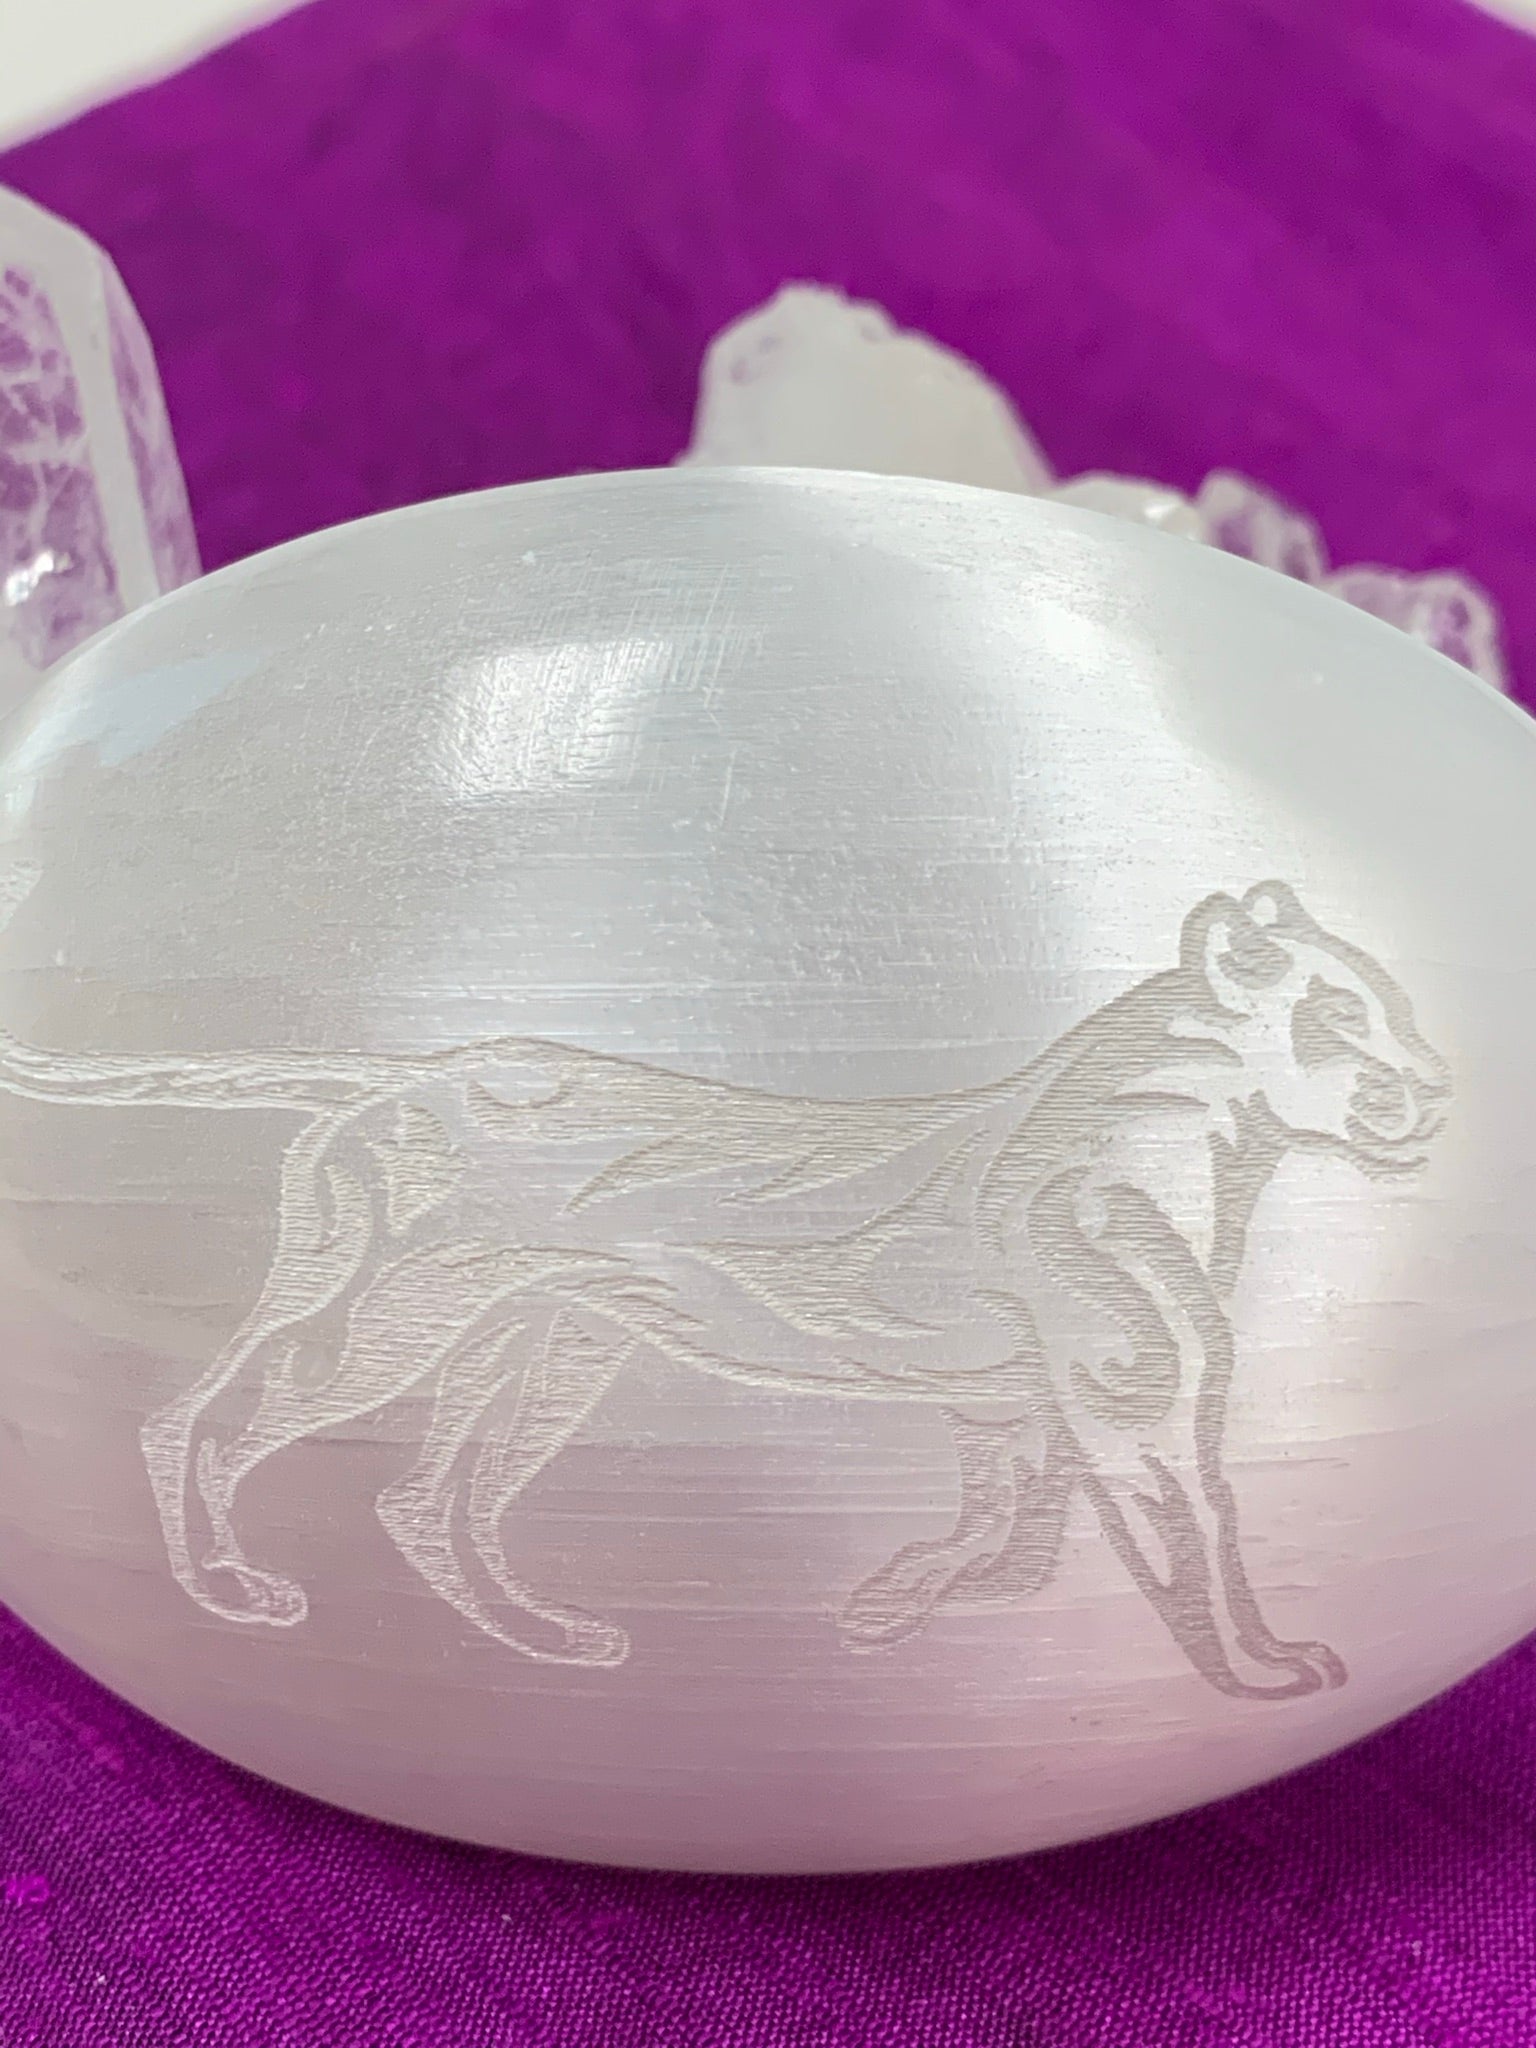 Close up view of the lioness etched on a white, polished selenite palm stone from our spirit animal collection. Lioness embodies the goddess & divine feminine and is related to The Great Mother. She is also seen as a protector, provider and as resourceful. She is the nurturer and fierce protector. The selenite ranges from translucent to milky white depending on the stone. Selenite is sourced ethically and workers are paid living wages.